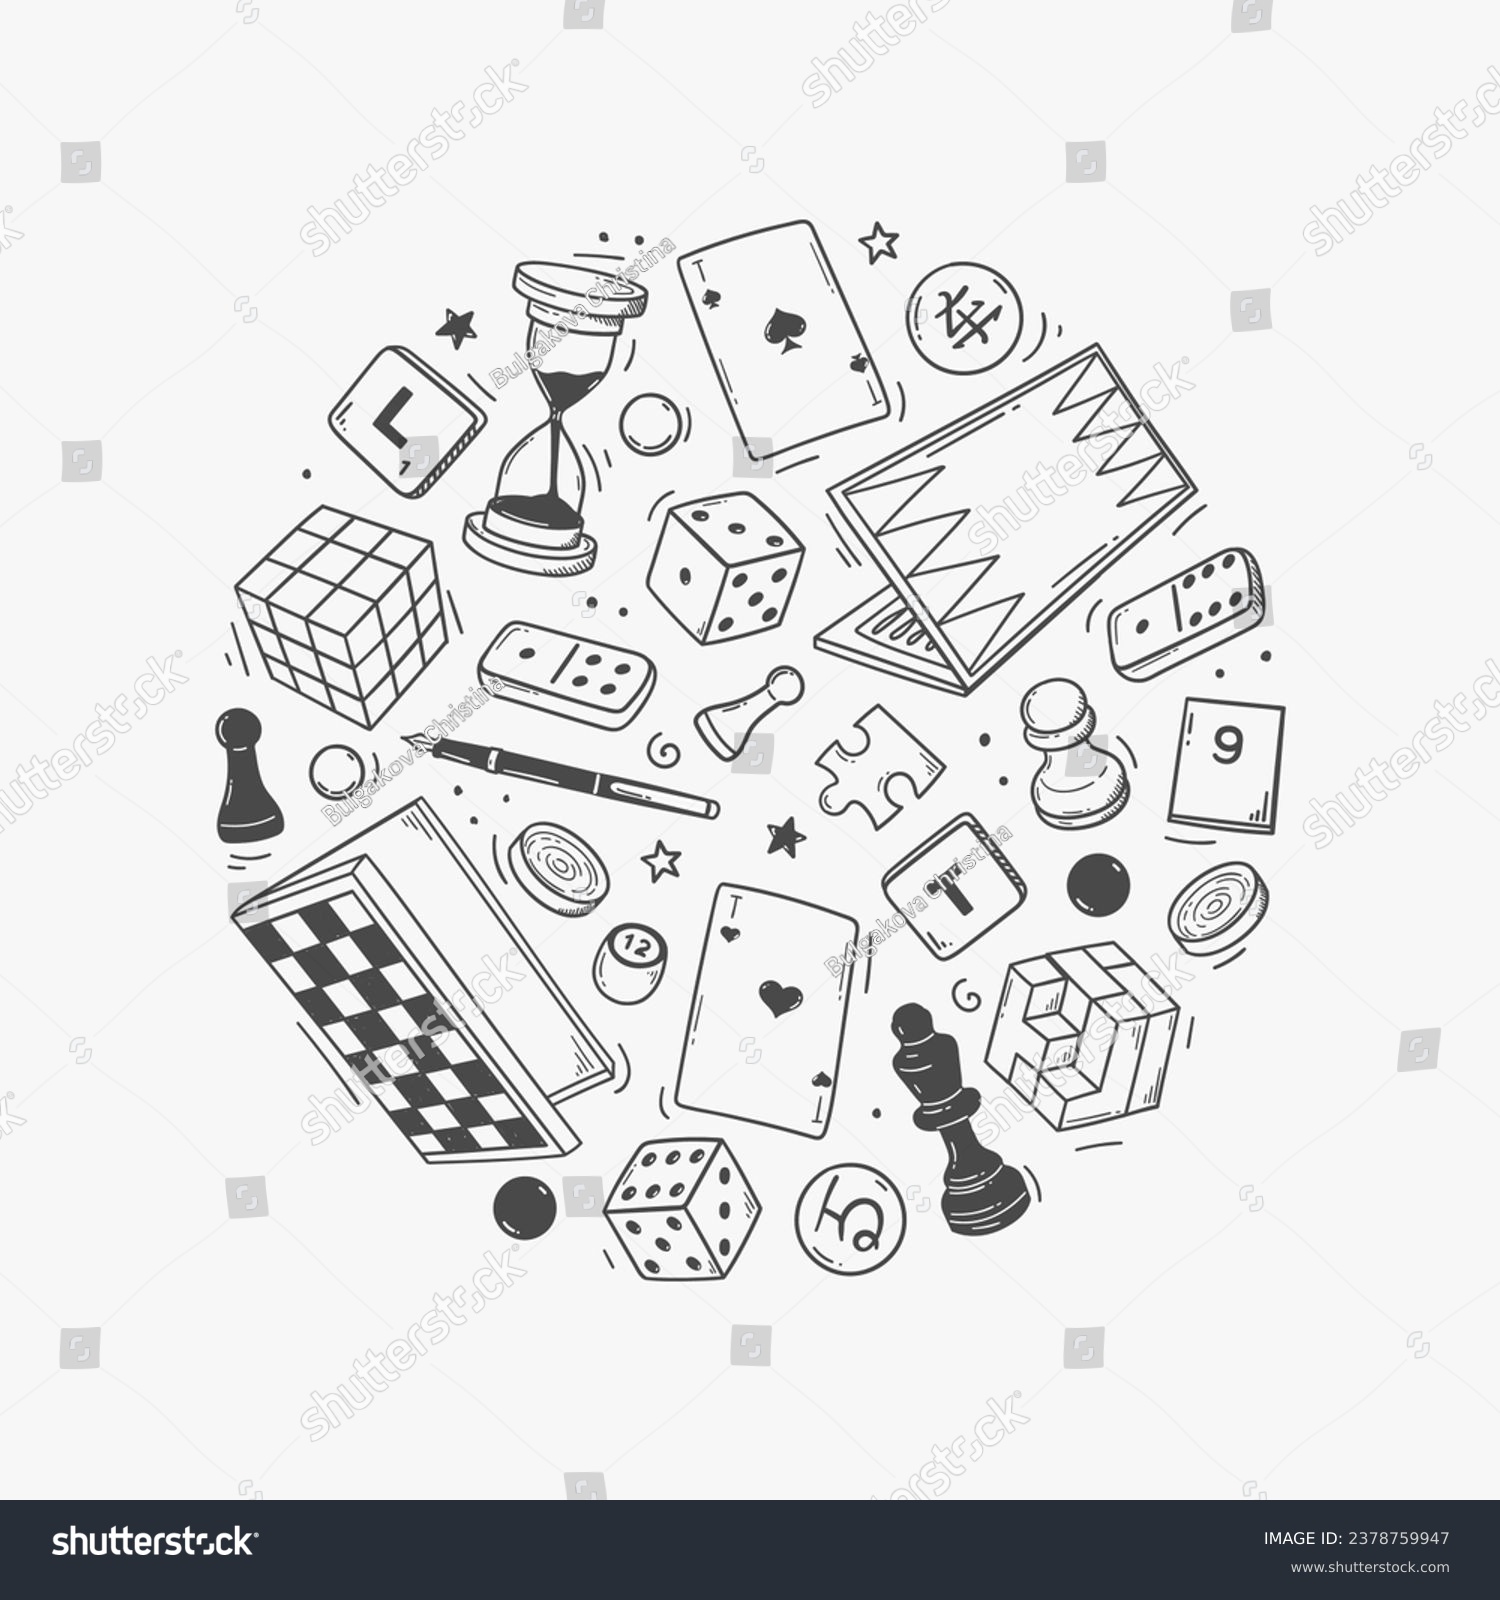 SVG of set of hand-drawn board games. sketch doodle of chess, checkers, go, dominoes, playing cards, scrabble, backgammon isolated on background. svg